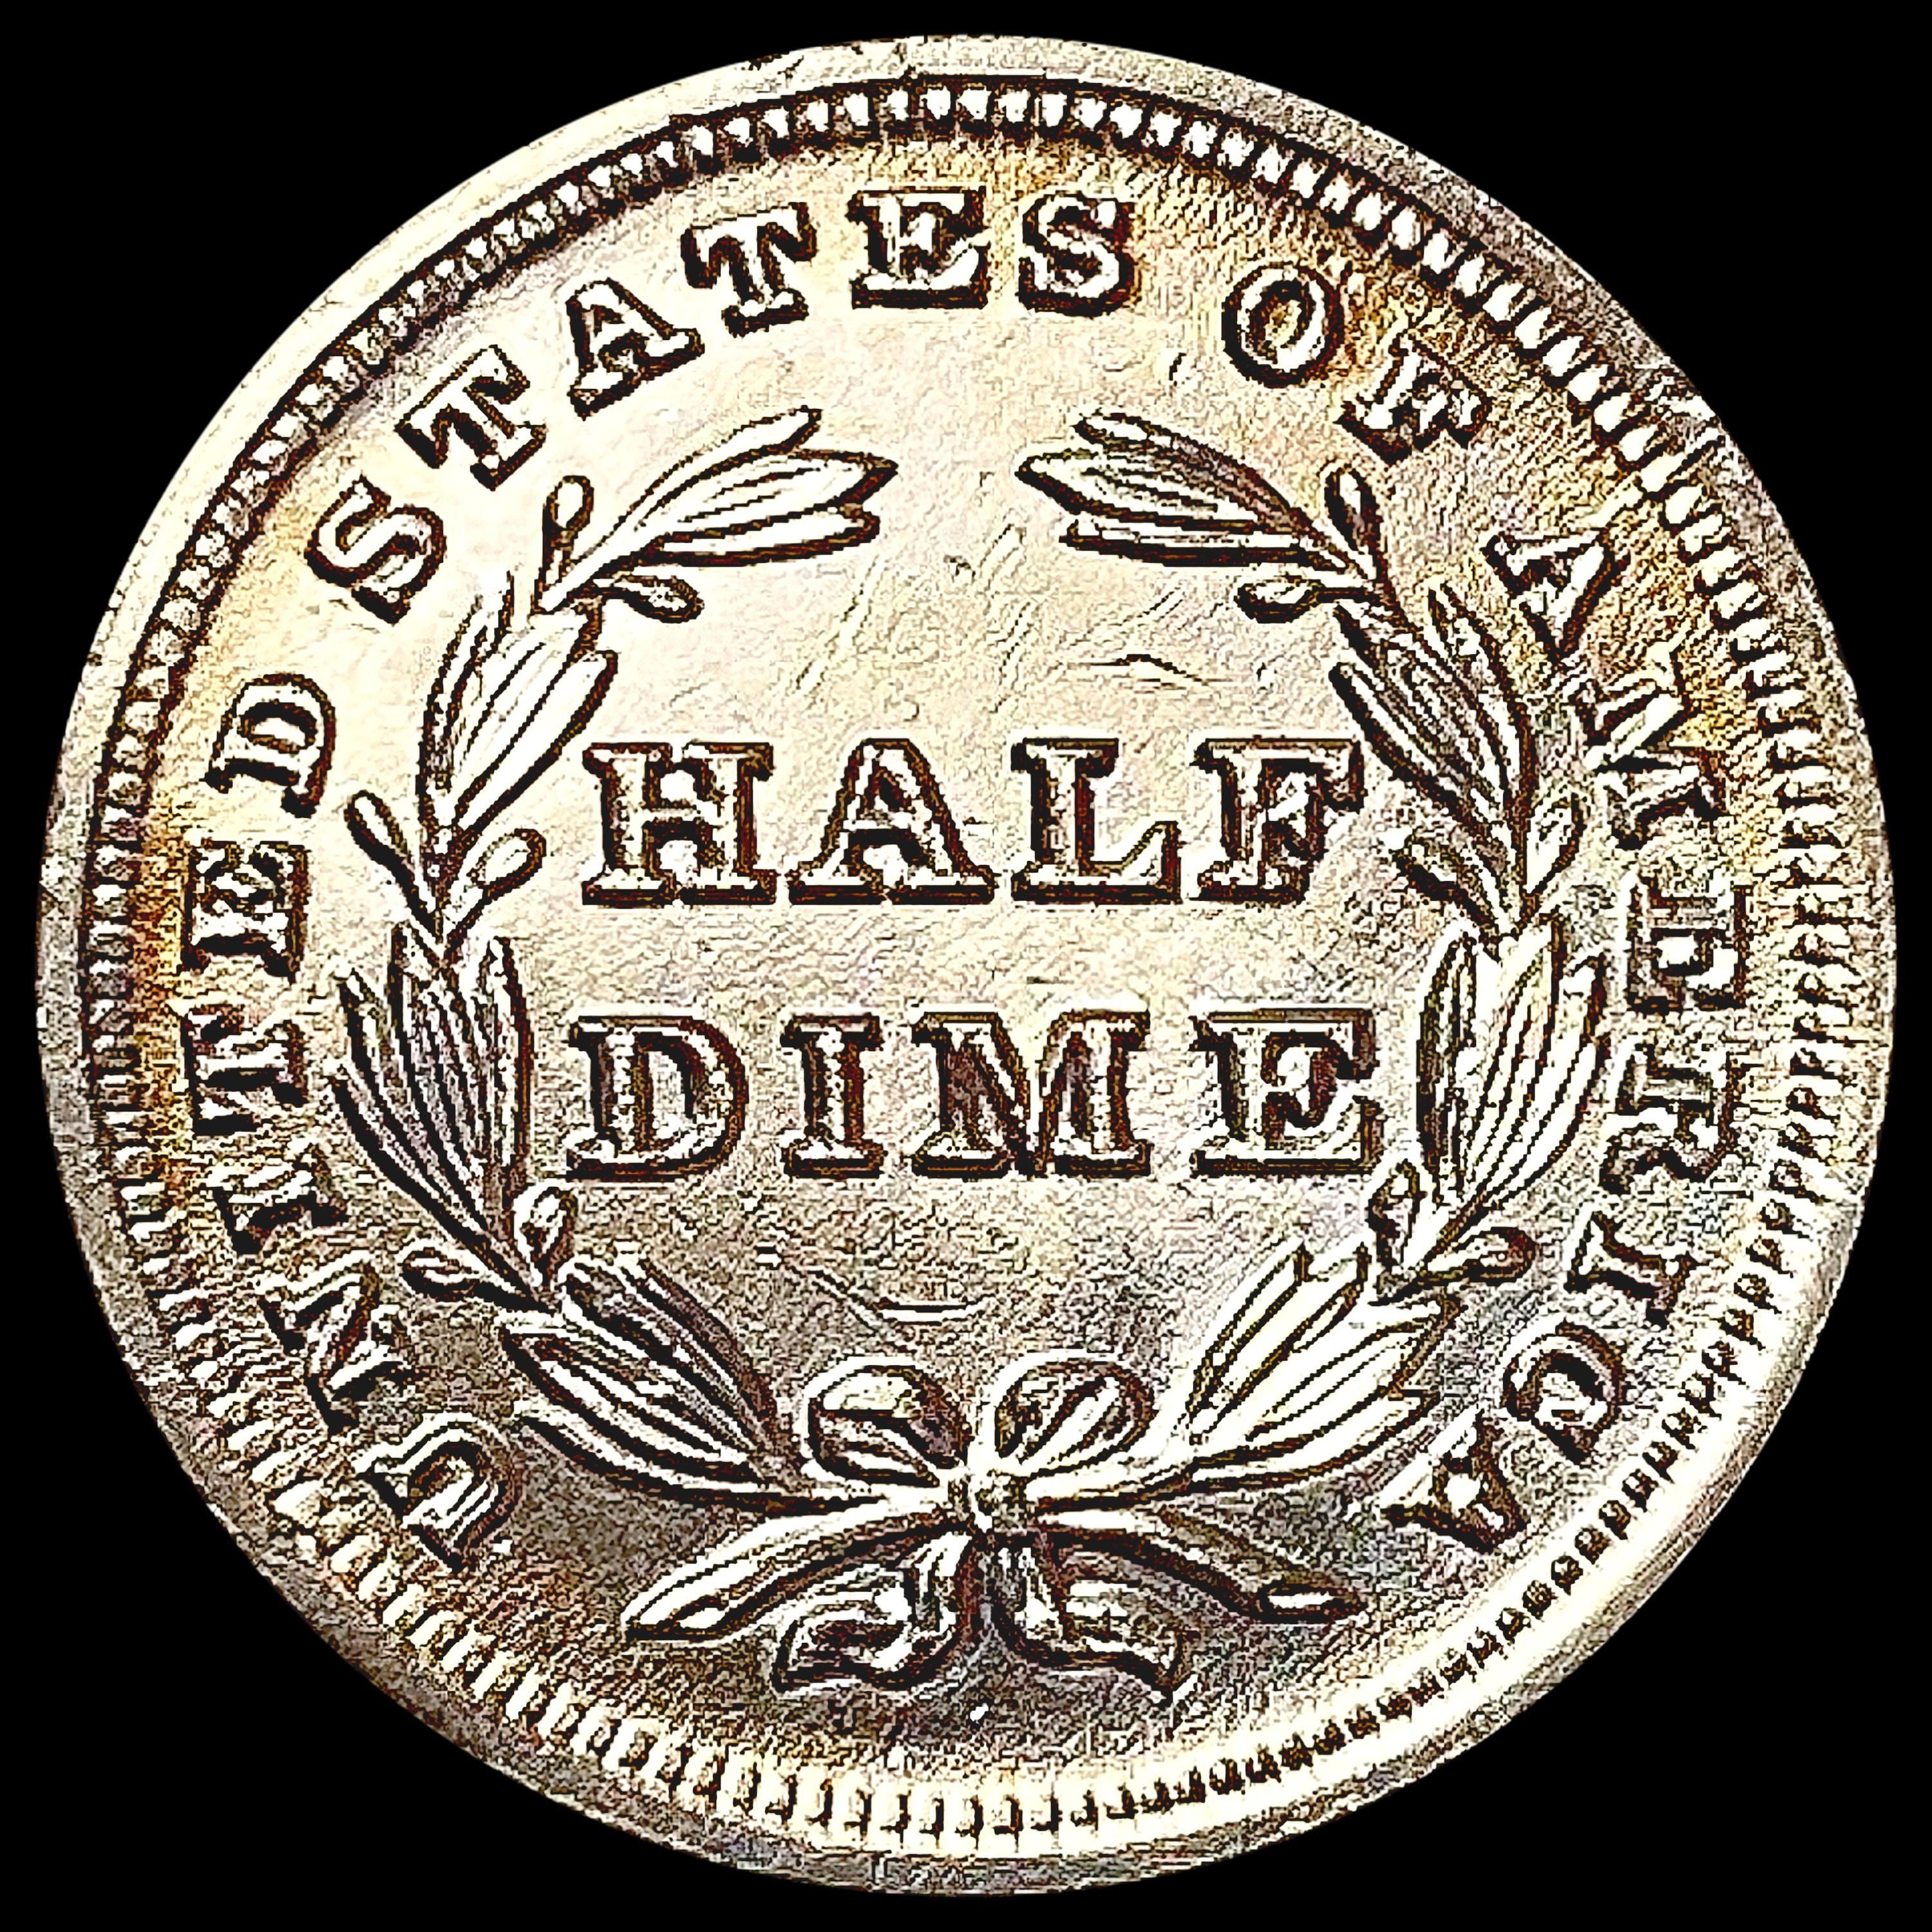 1837 Seated Liberty Half Dime CLOSELY UNCIRCULATED